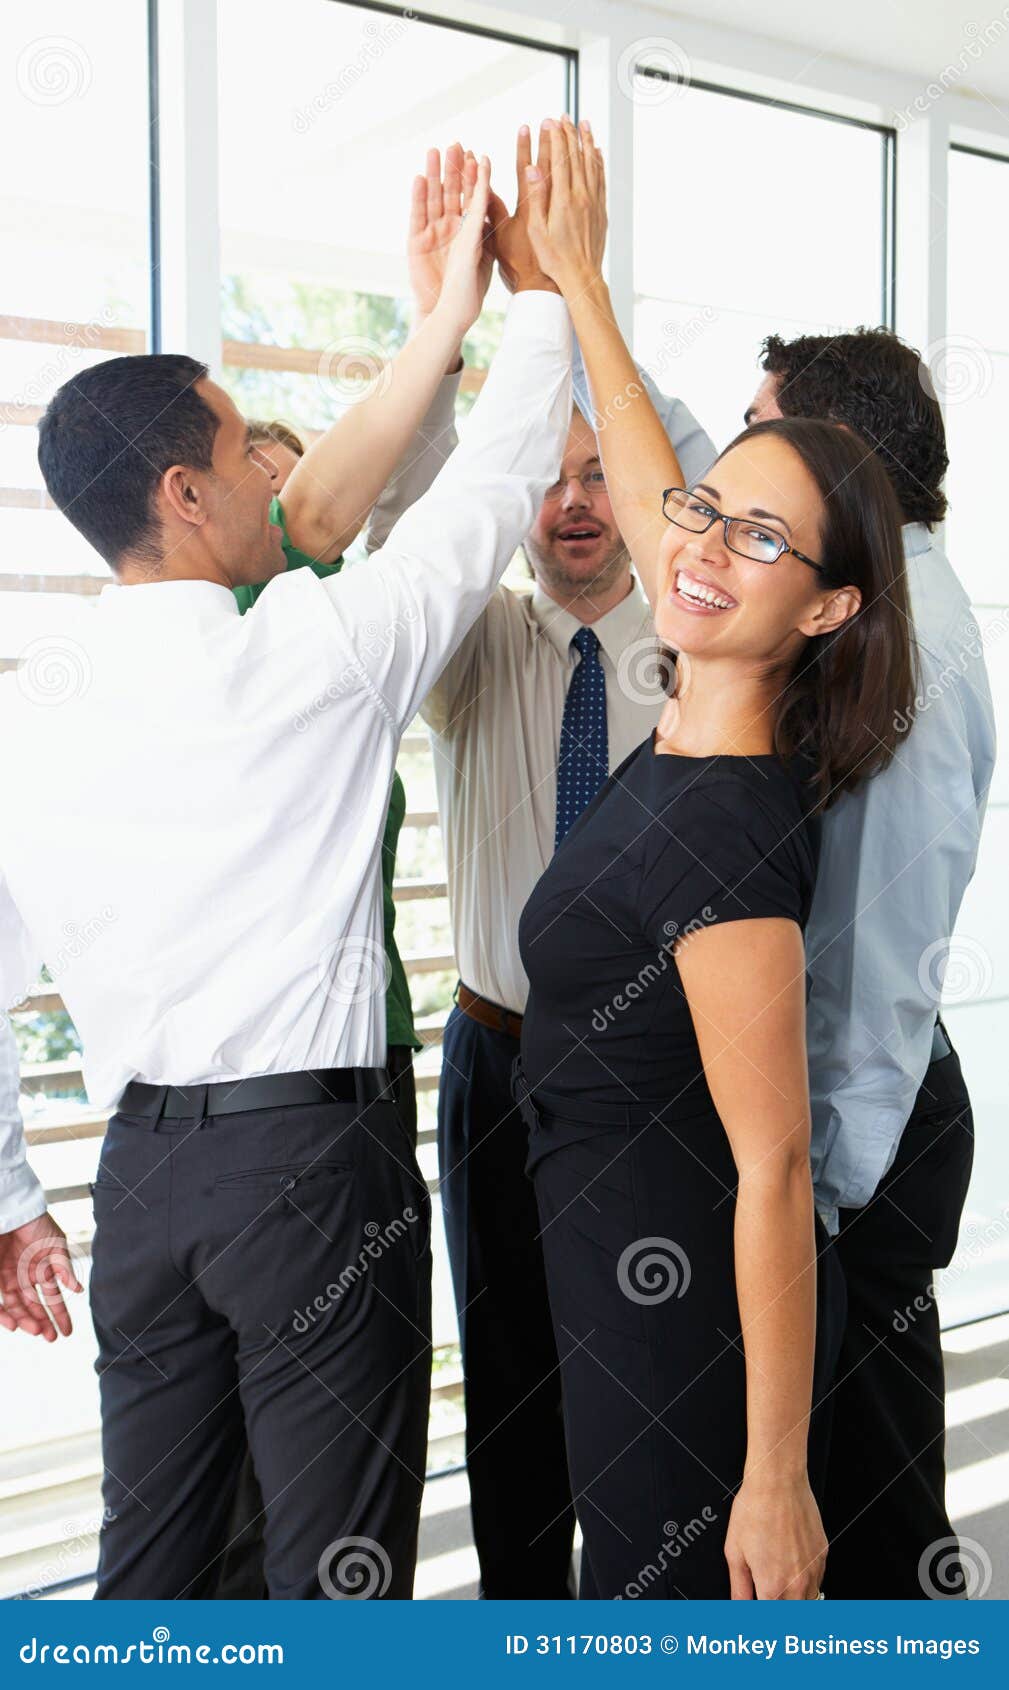 Business Team Giving One Another High Five Stock Image - Image of ... Office Team Celebration